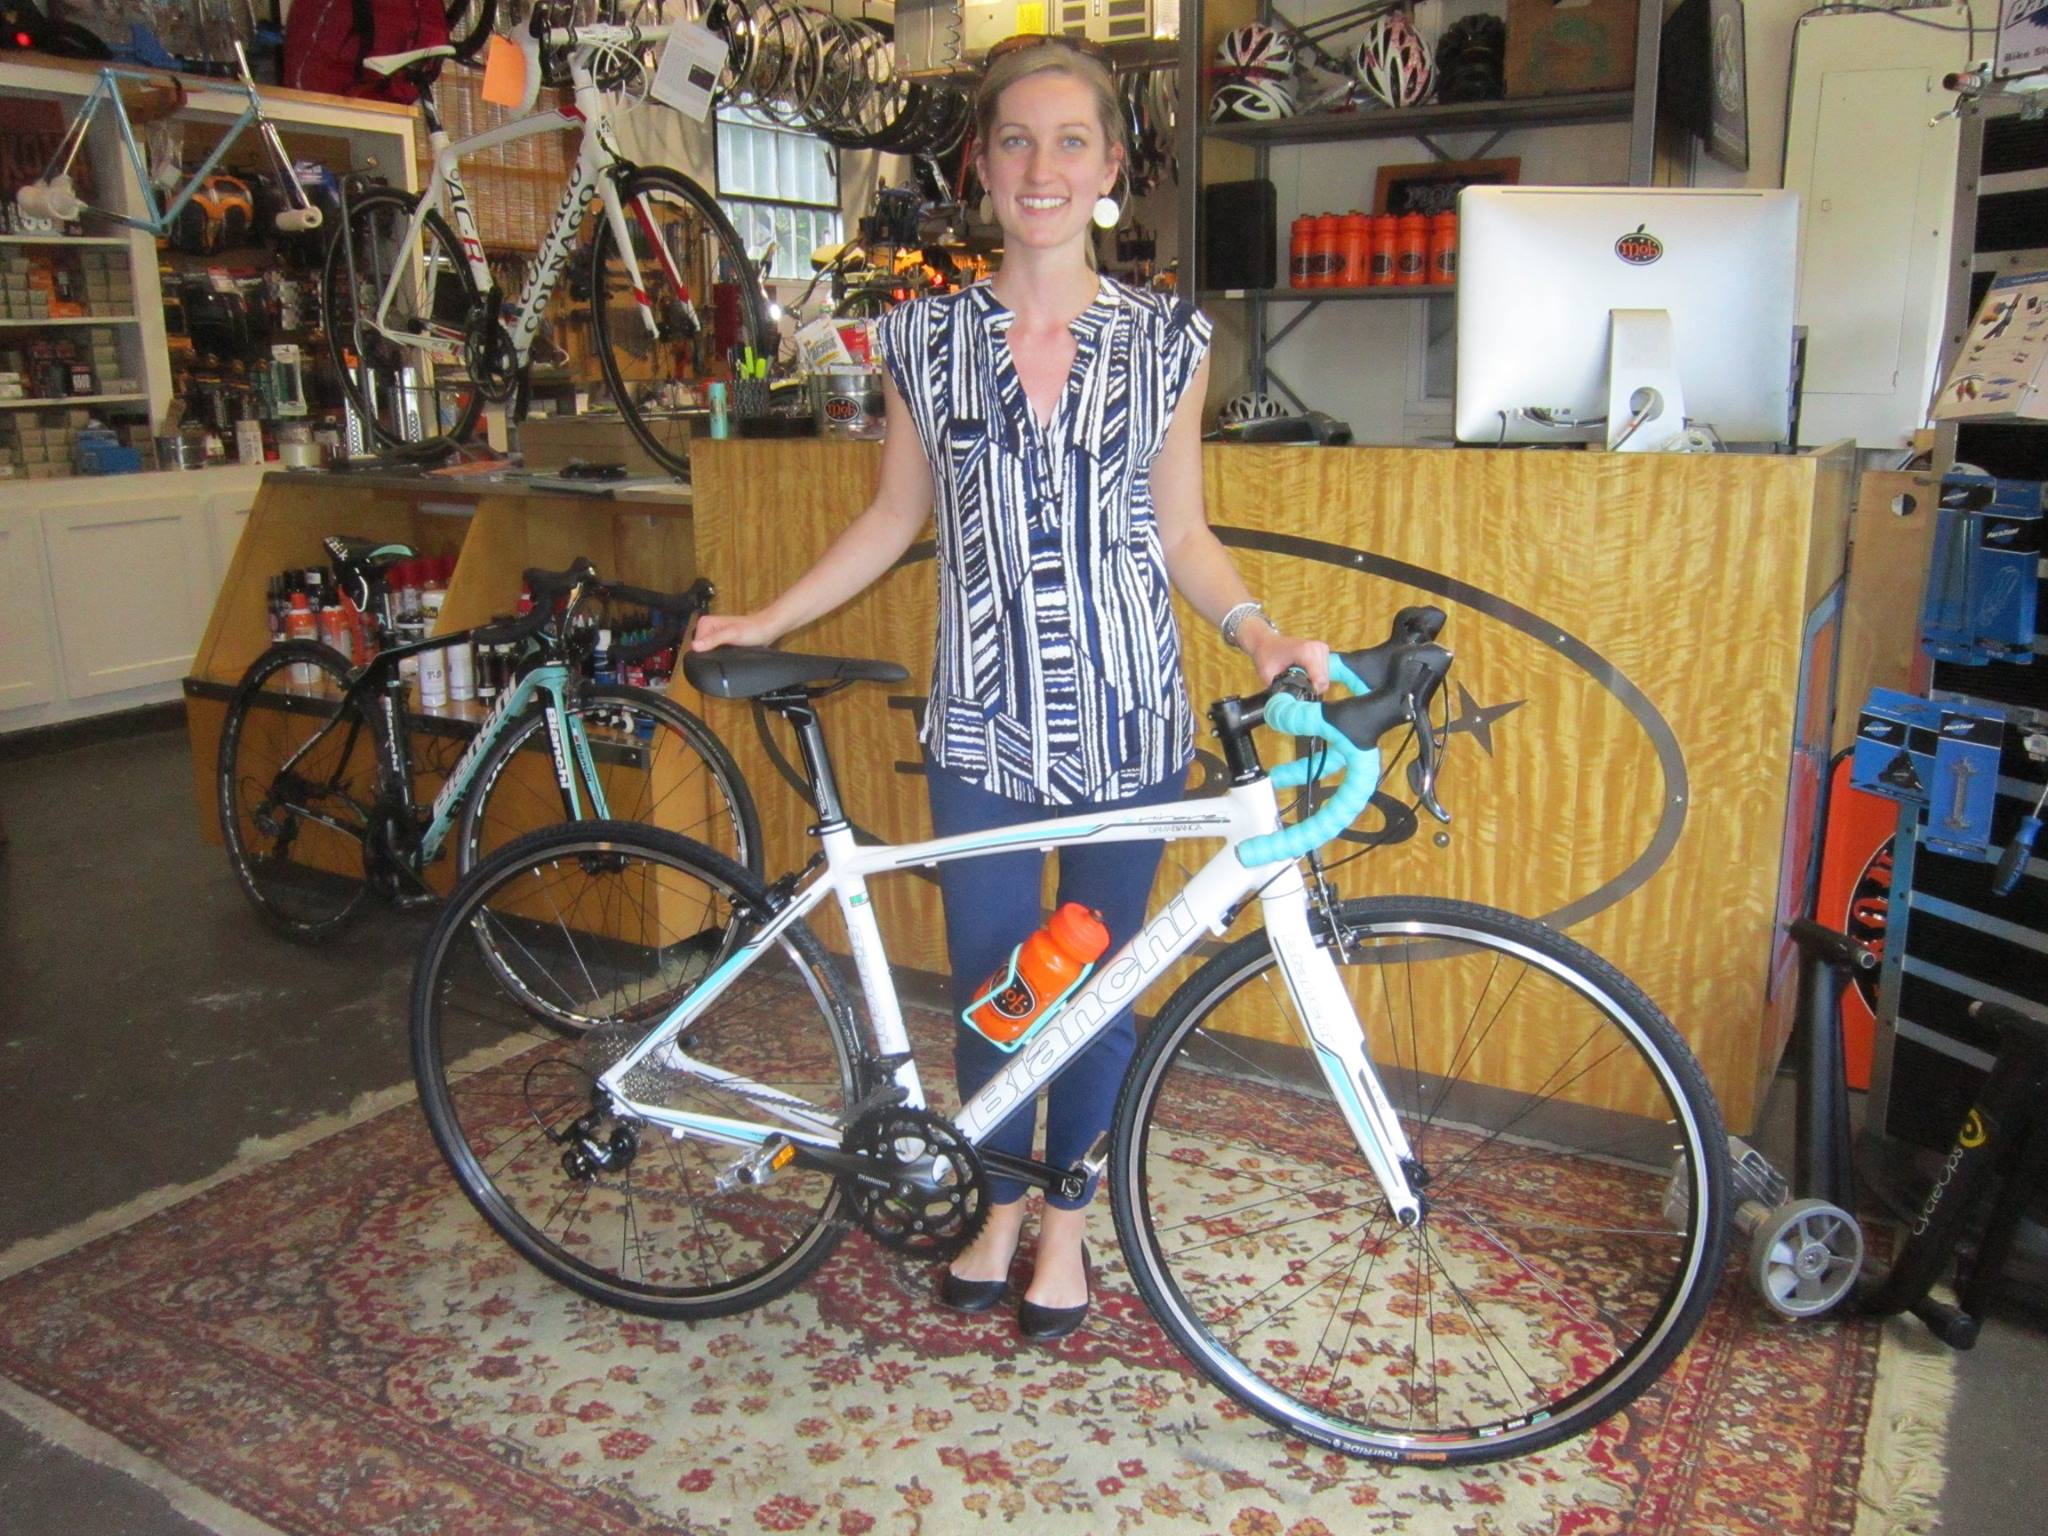 Nicole with her new Bianchi Via Nirone 7 Dama Blanca. She is ready for cycling adventure on her beautiful new Bianchi Bicycle. Looking Good!